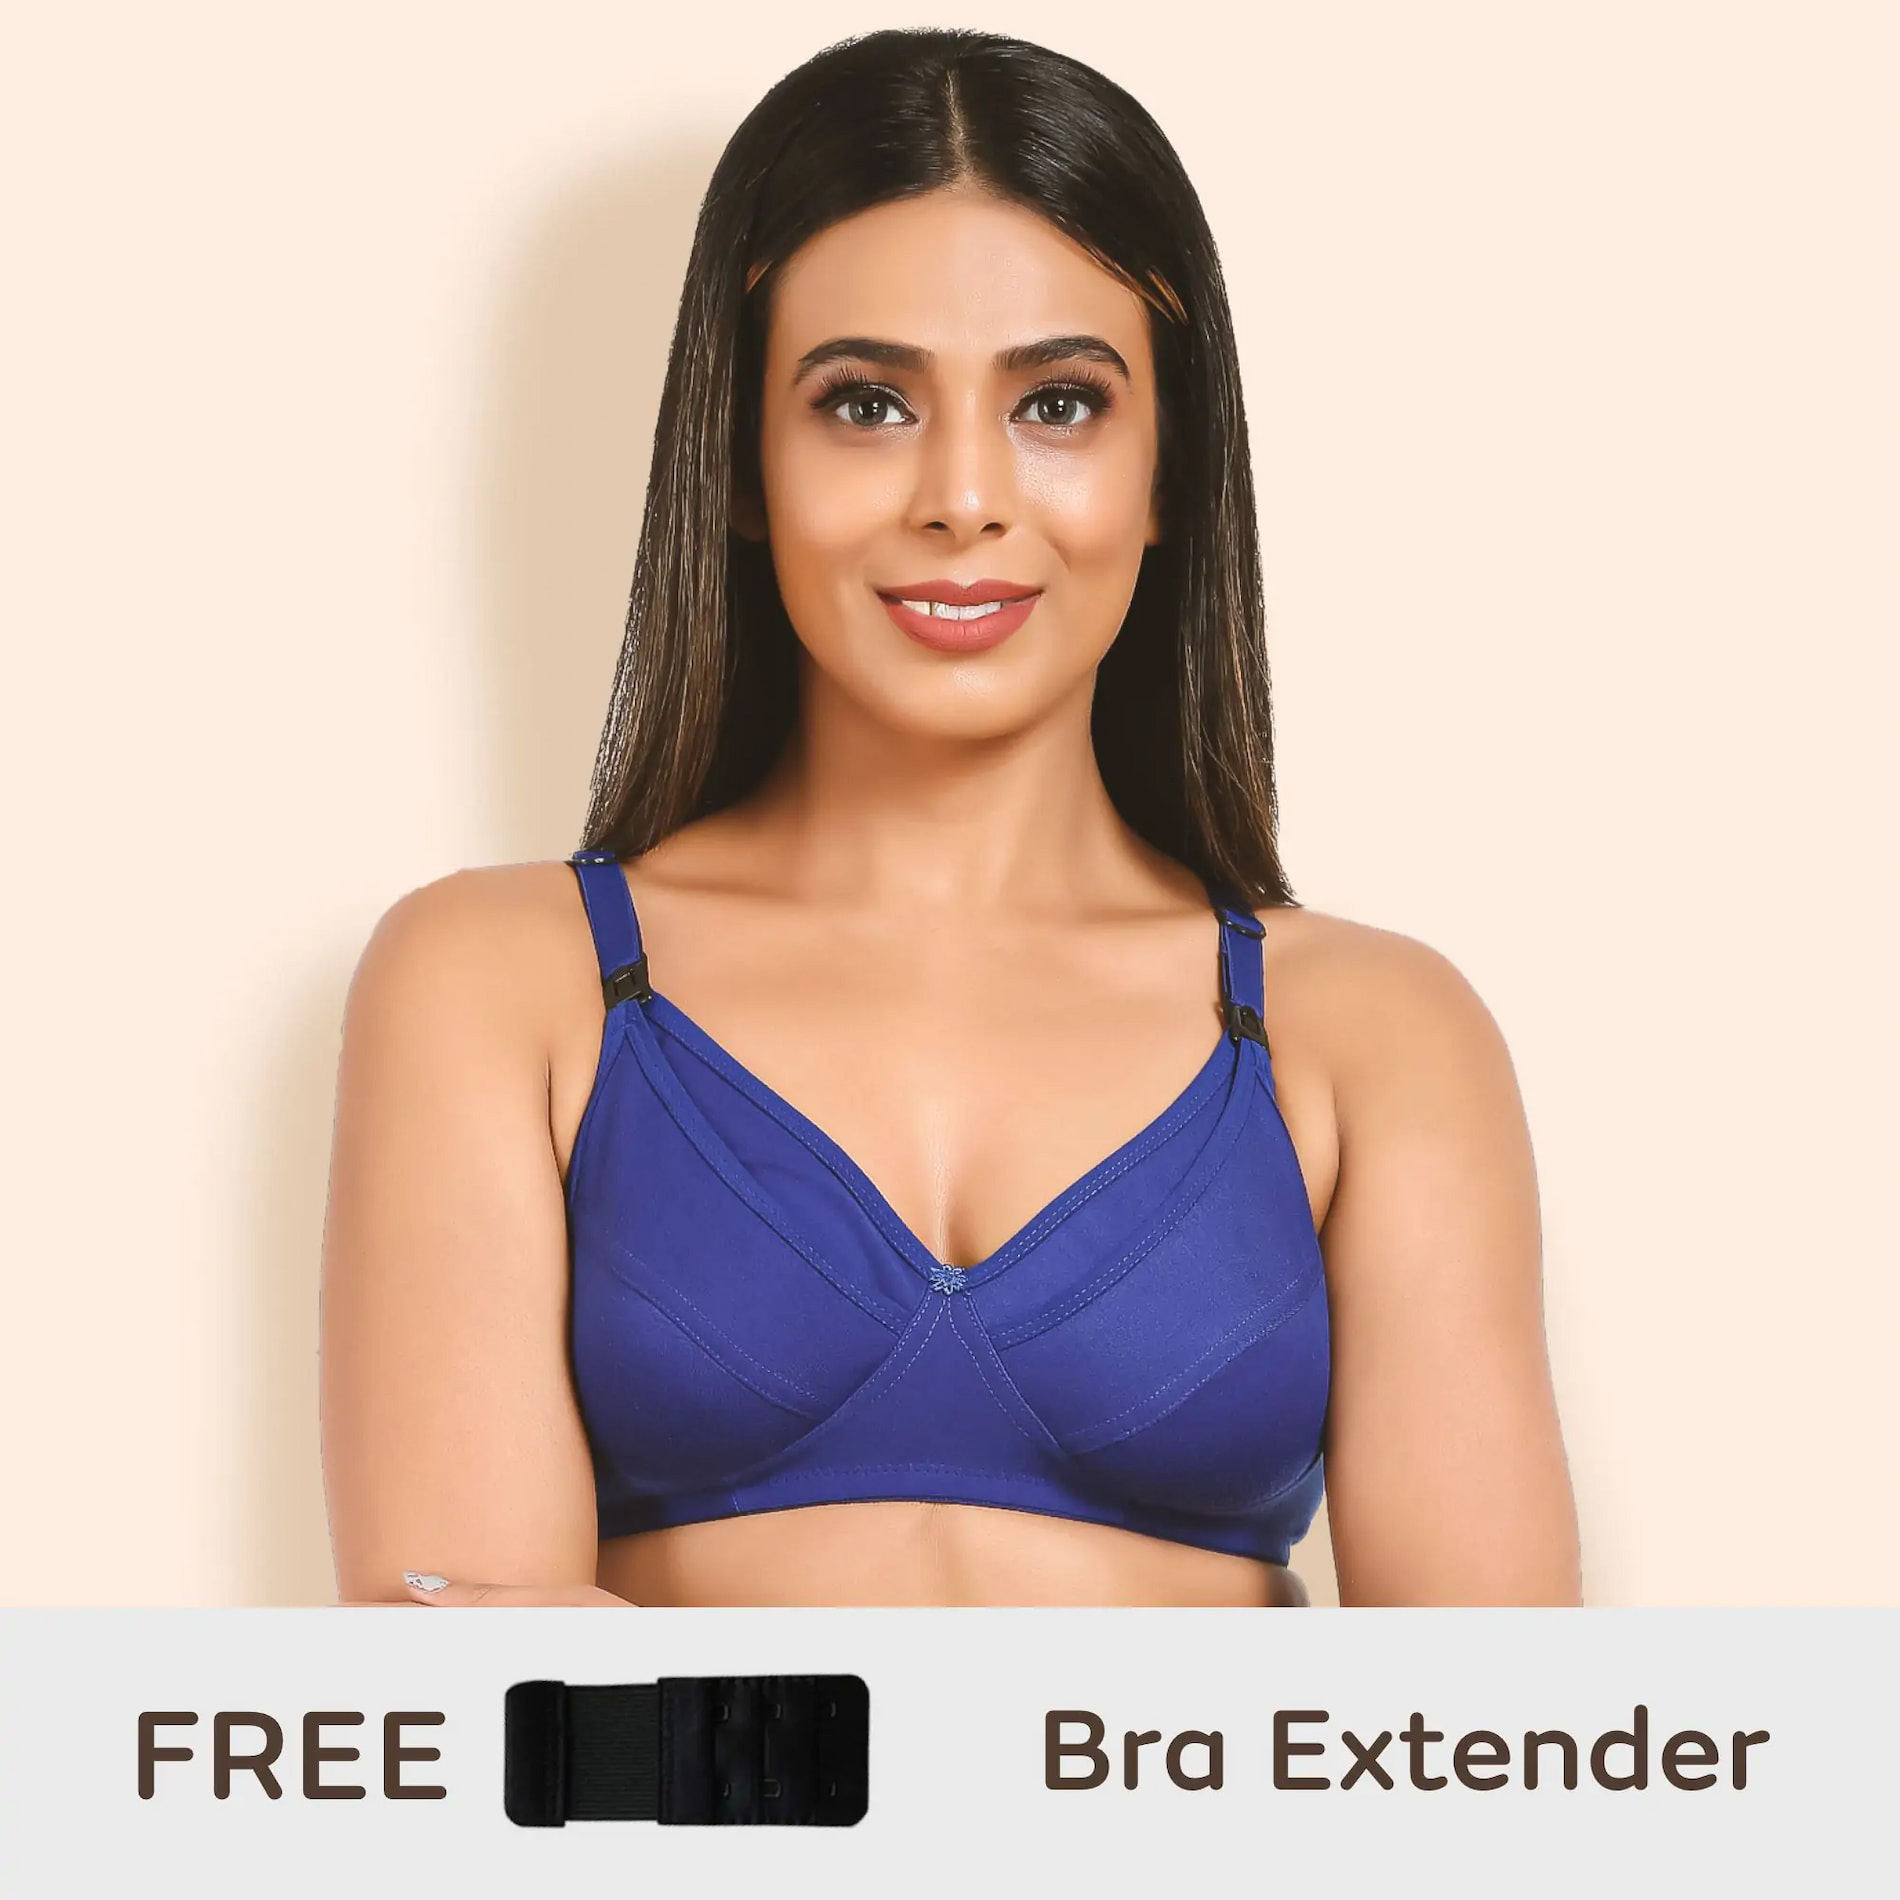 Maternity/Nursing Bras Non-Wired, Non-Padded with free Bra Extender – Persian Blue 32 B 